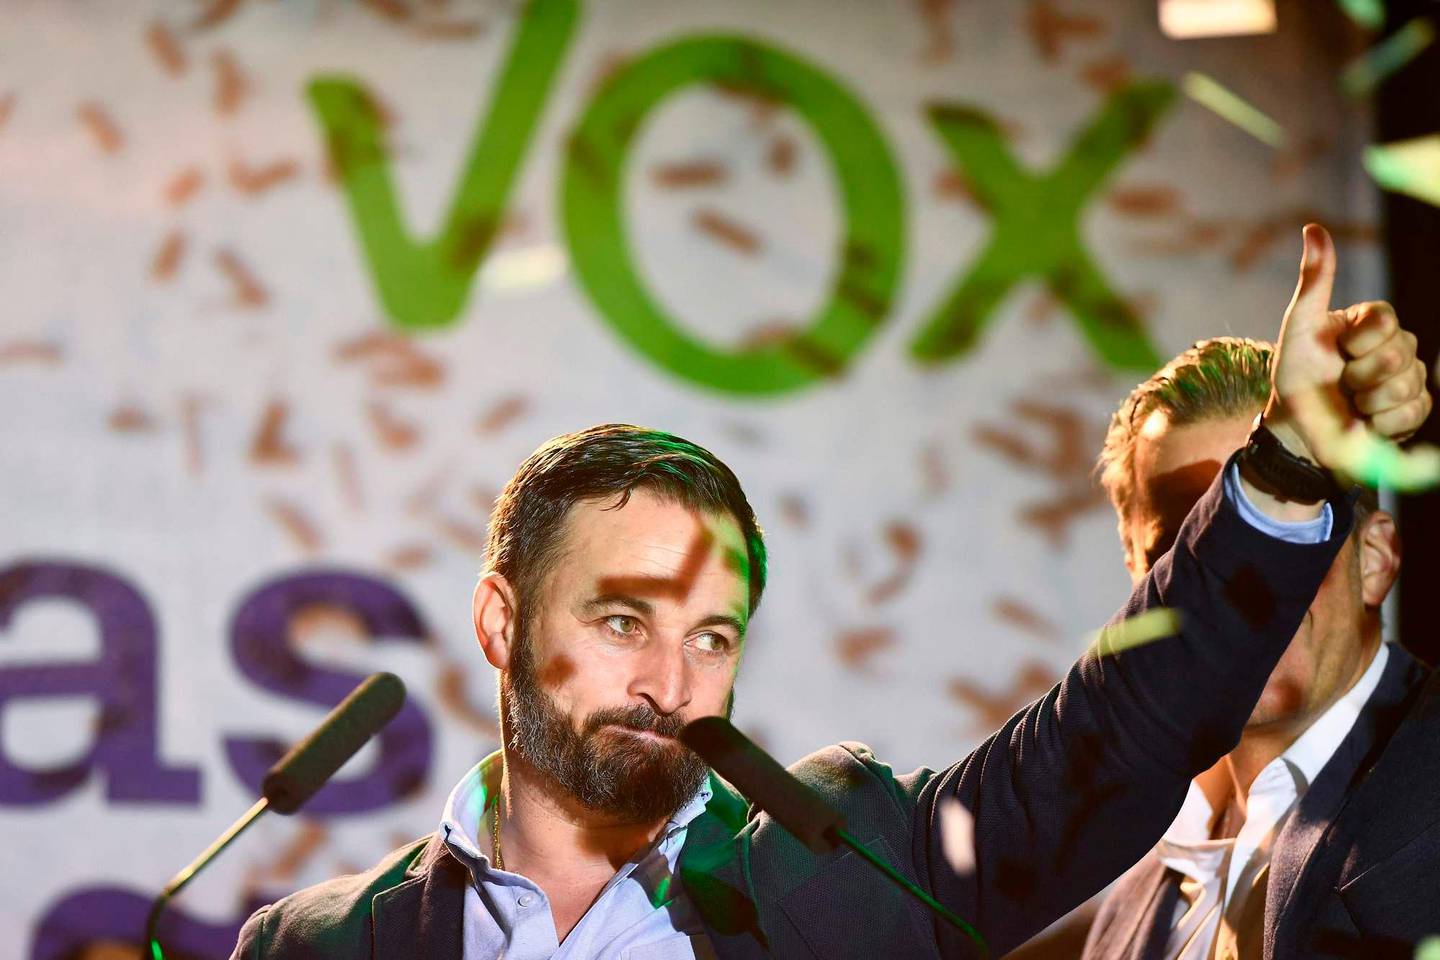 Spanish far-right VOX party leader and candidate for prime minister Santiago Abascal delivers a speech during an election night rally in Madrid after Spain held general elections on April 28, 2019. - Spain's socialists won snap elections but without the necessary majority to govern in a fragmented political landscape marked by the far-right's dramatic eruption in parliament. (Photo by OSCAR DEL POZO / AFP)